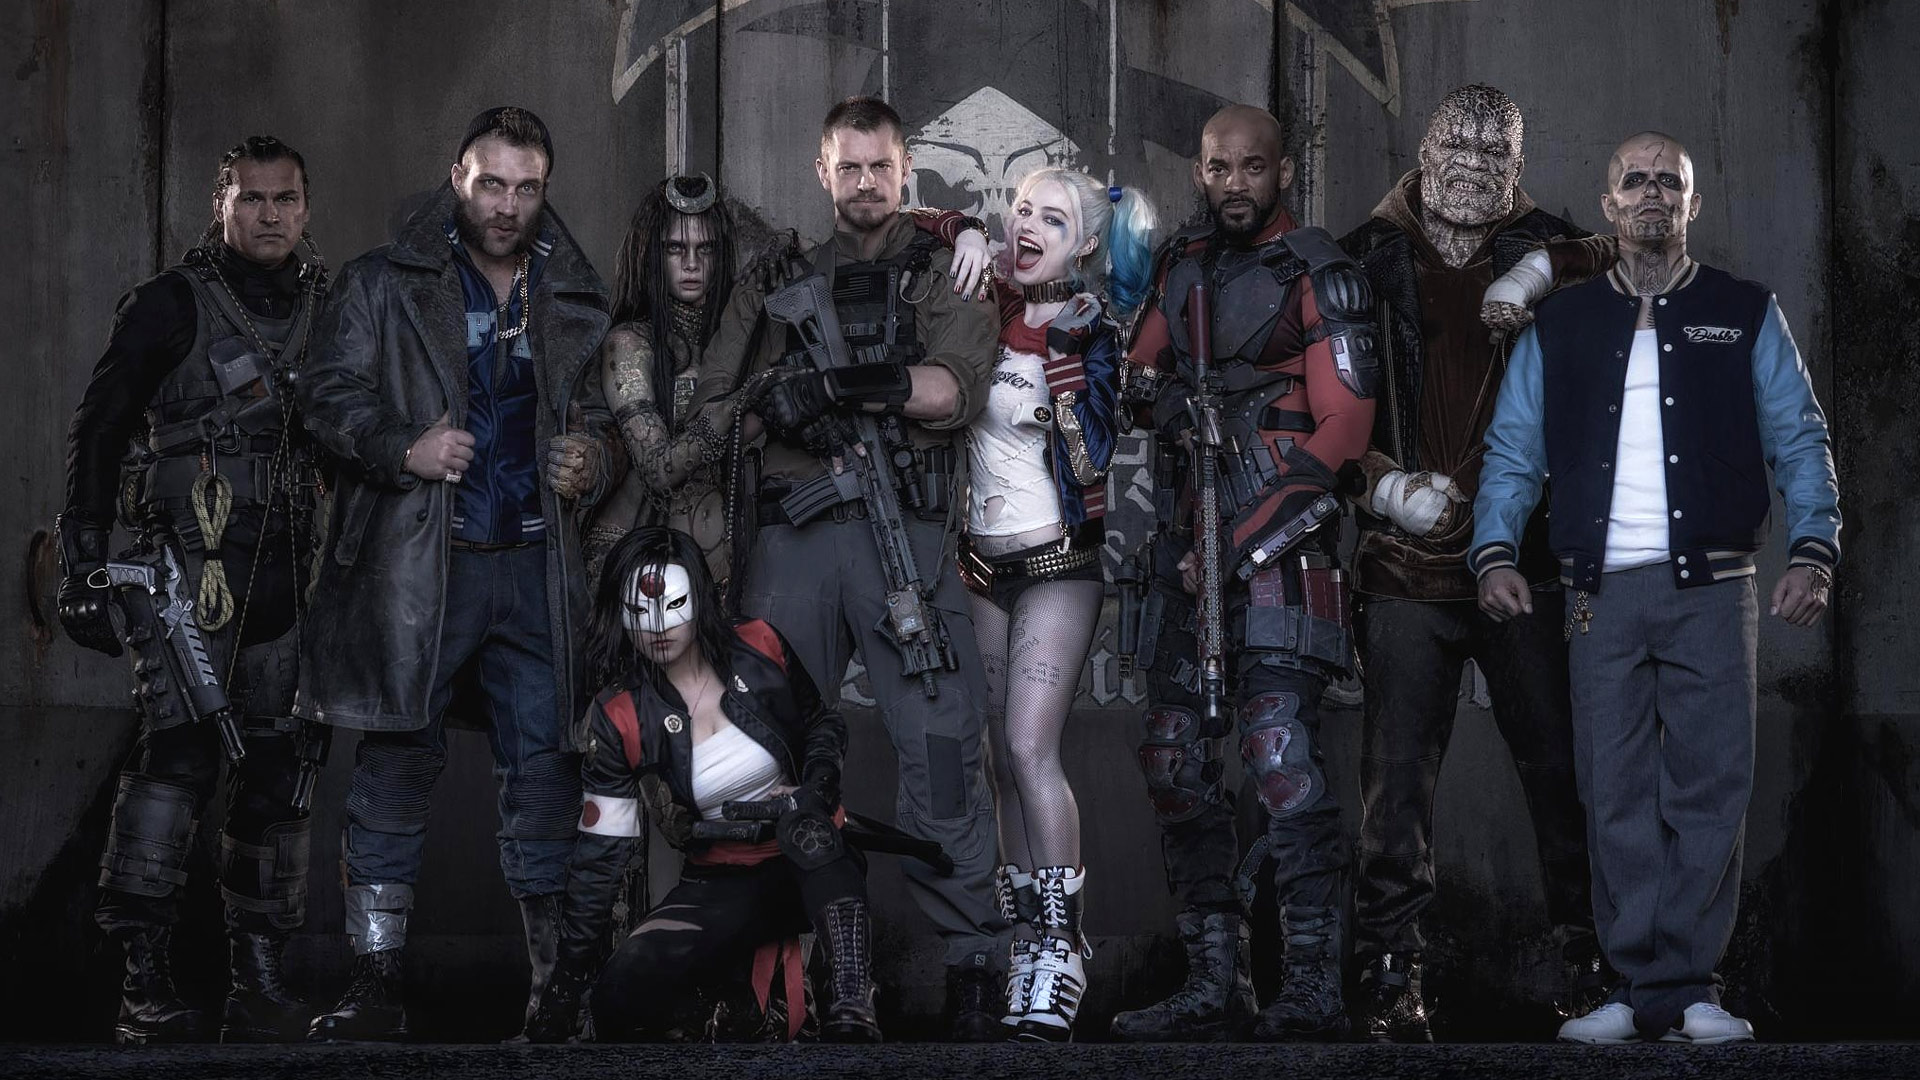 Suicide squad wallpaper Free full hd wallpapers for 1080p